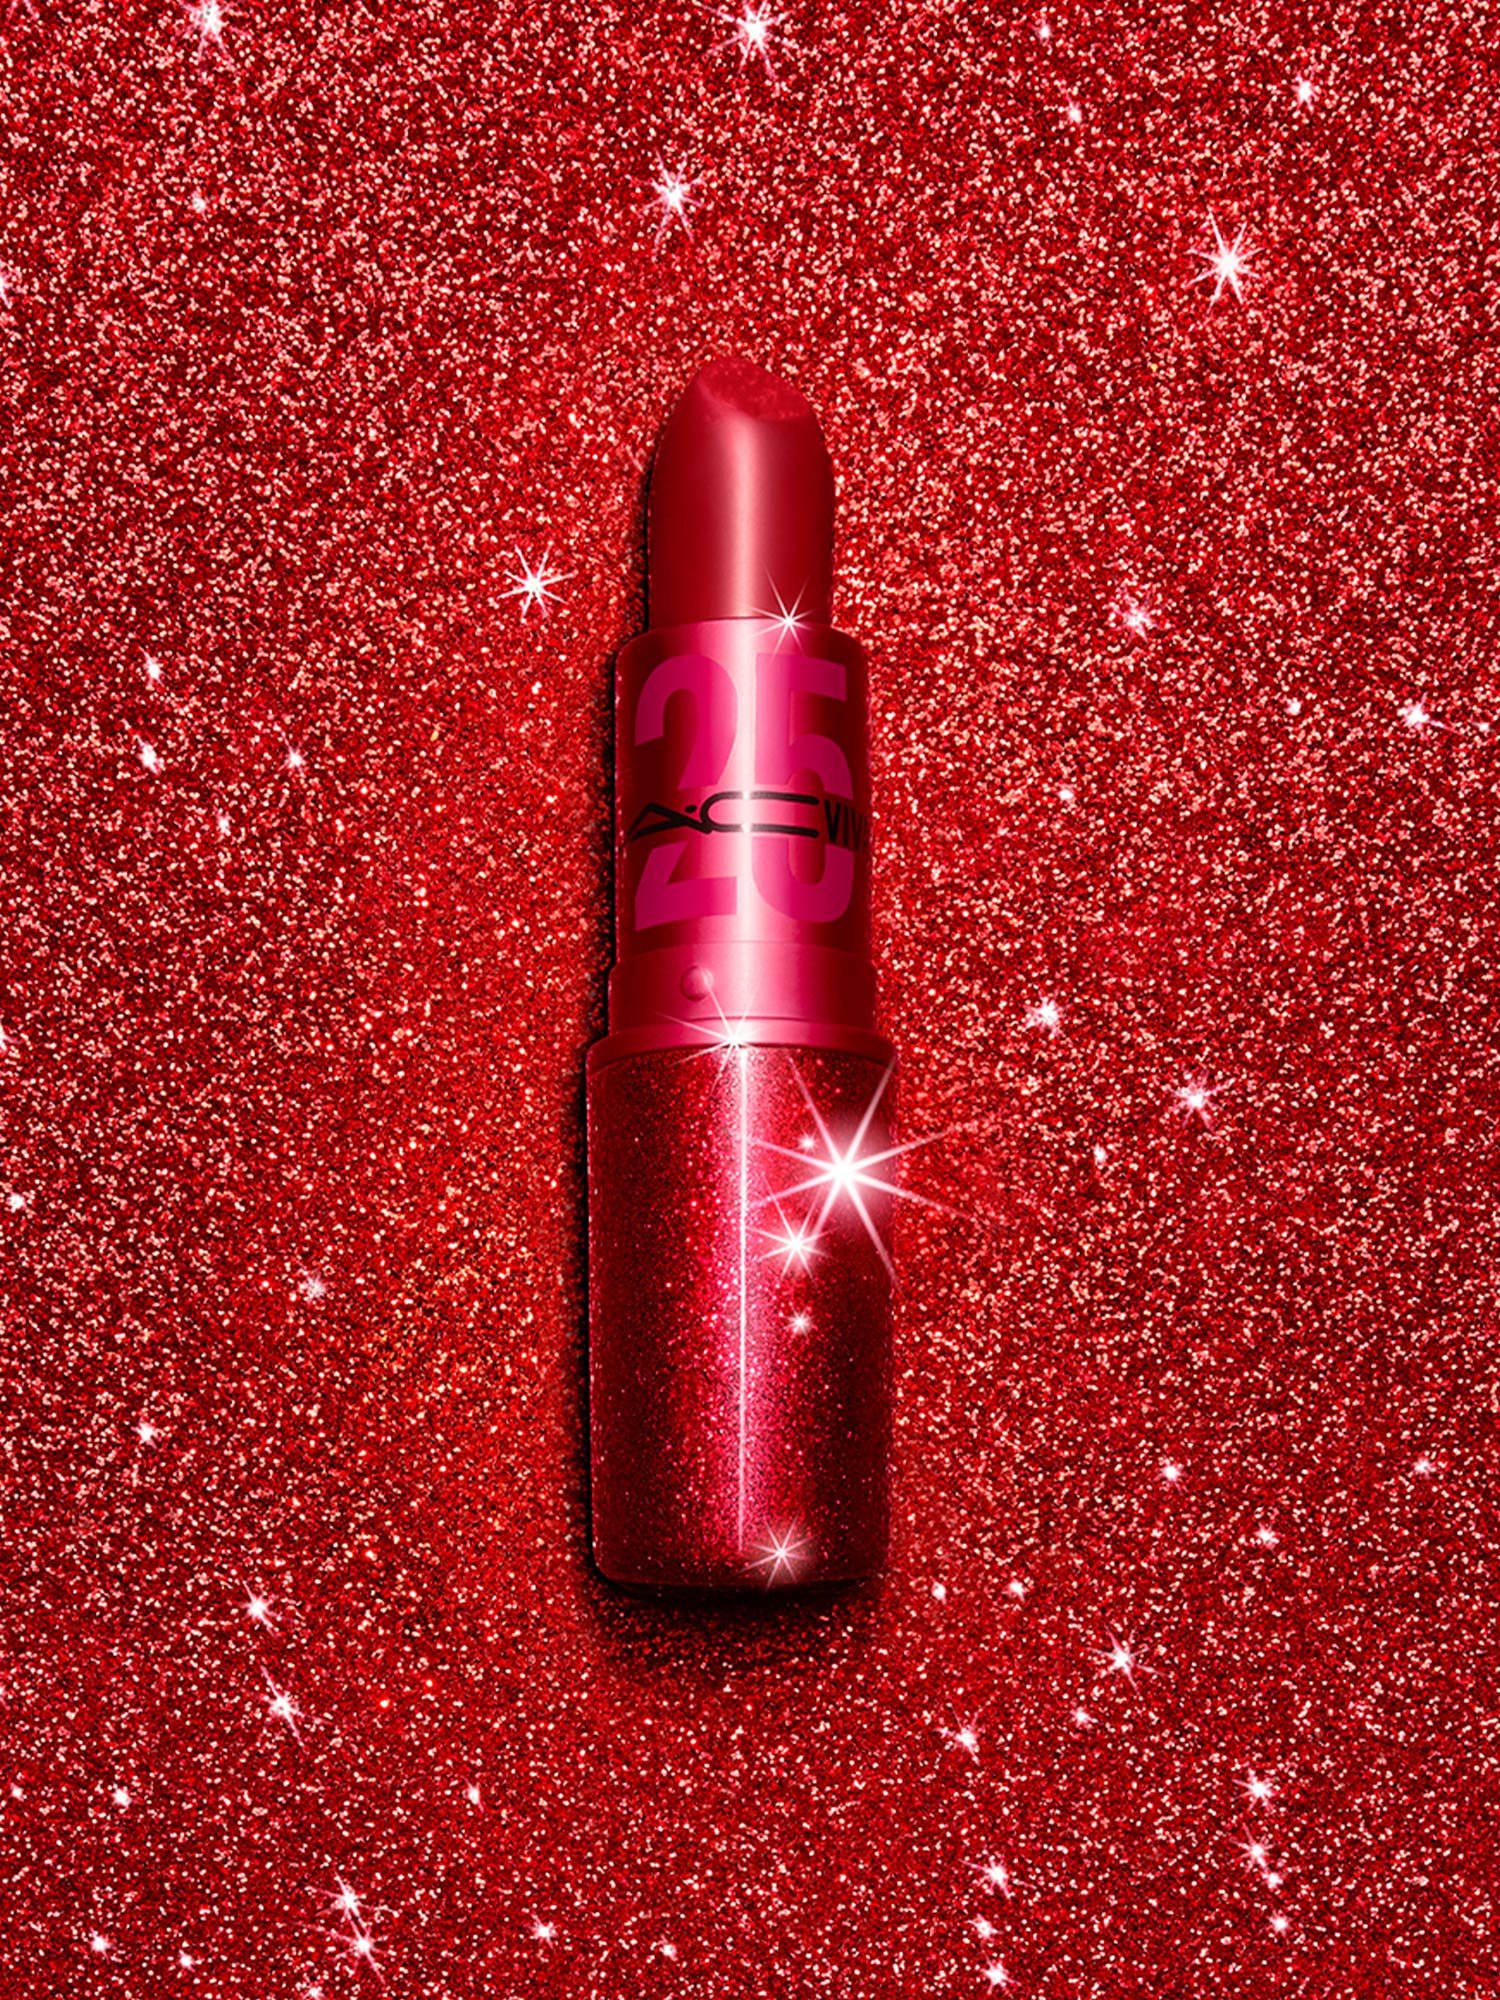 Close up of limited edition 25th Anniversary red lipstick on red glitter background, by RoAndCo Studio